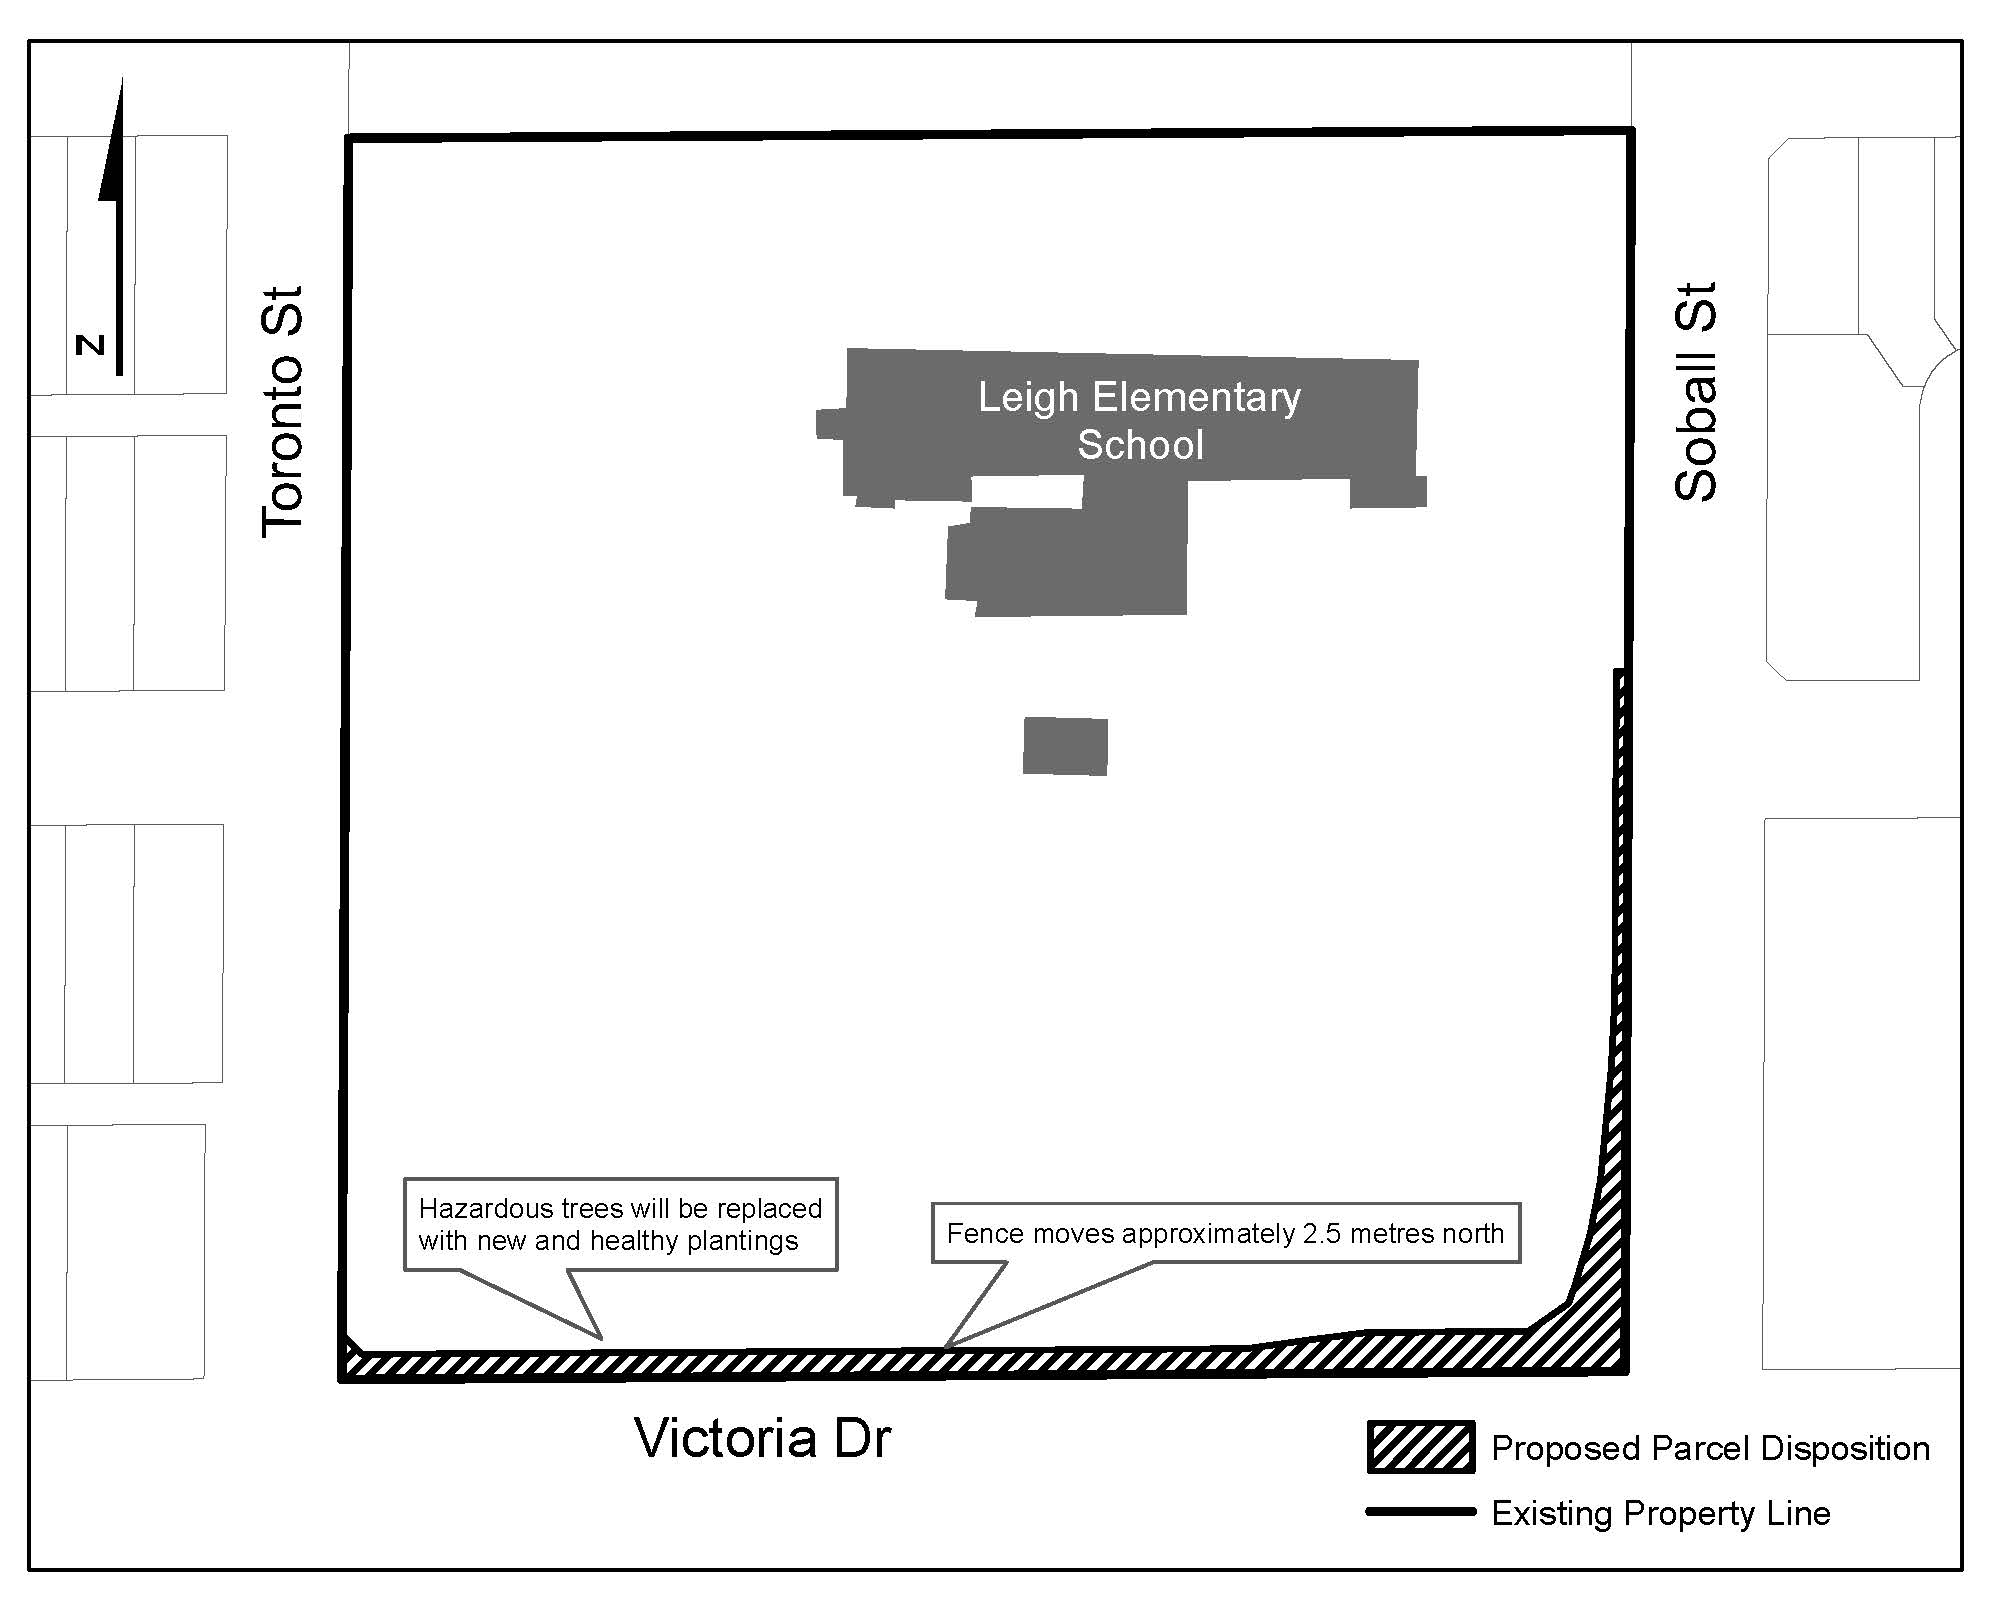 Leigh Elementary Proposed Parcel Disposition Map.jpg